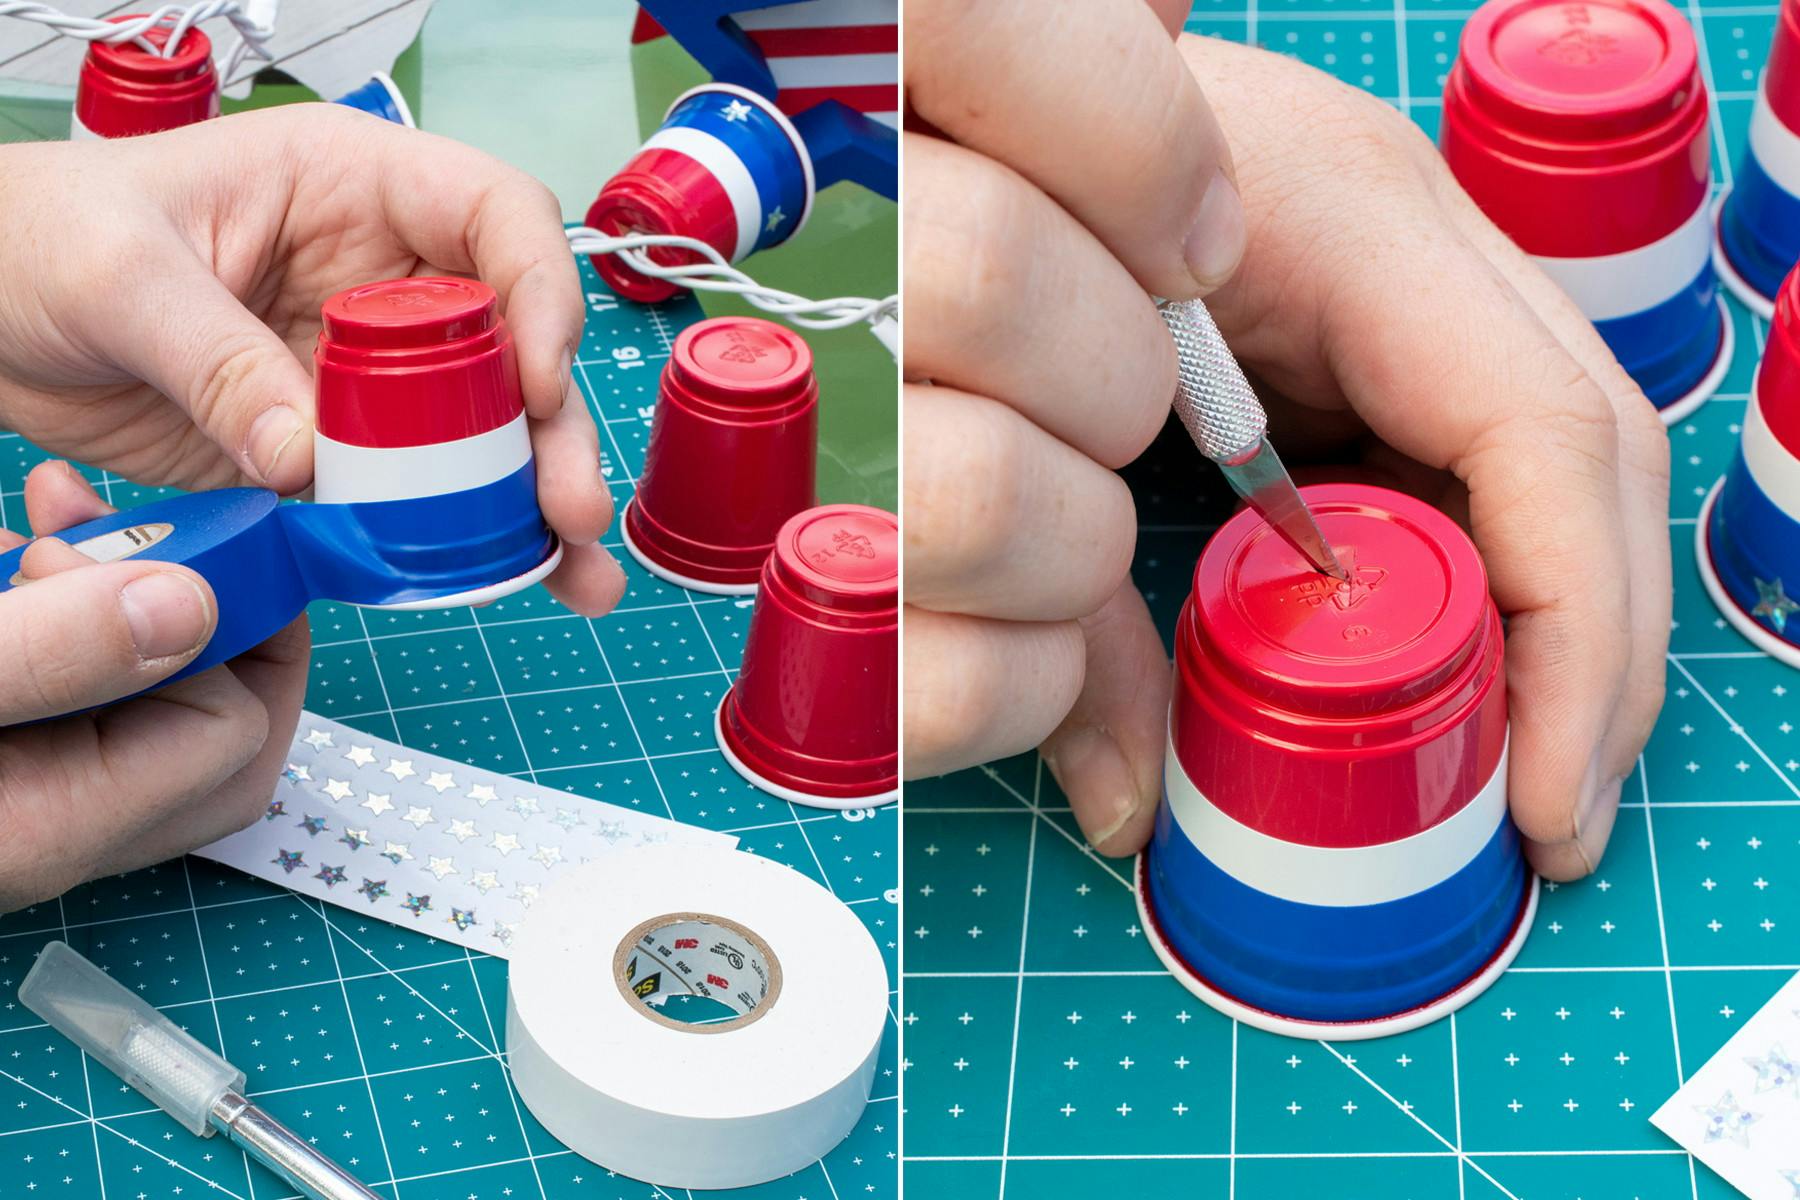 A person's hands using white and blue electrical tape on plastic red shot glass cups to make them red, white, and blue striped, and a person's hand using a knife to cut a small hole into the bottom of the striped cup.